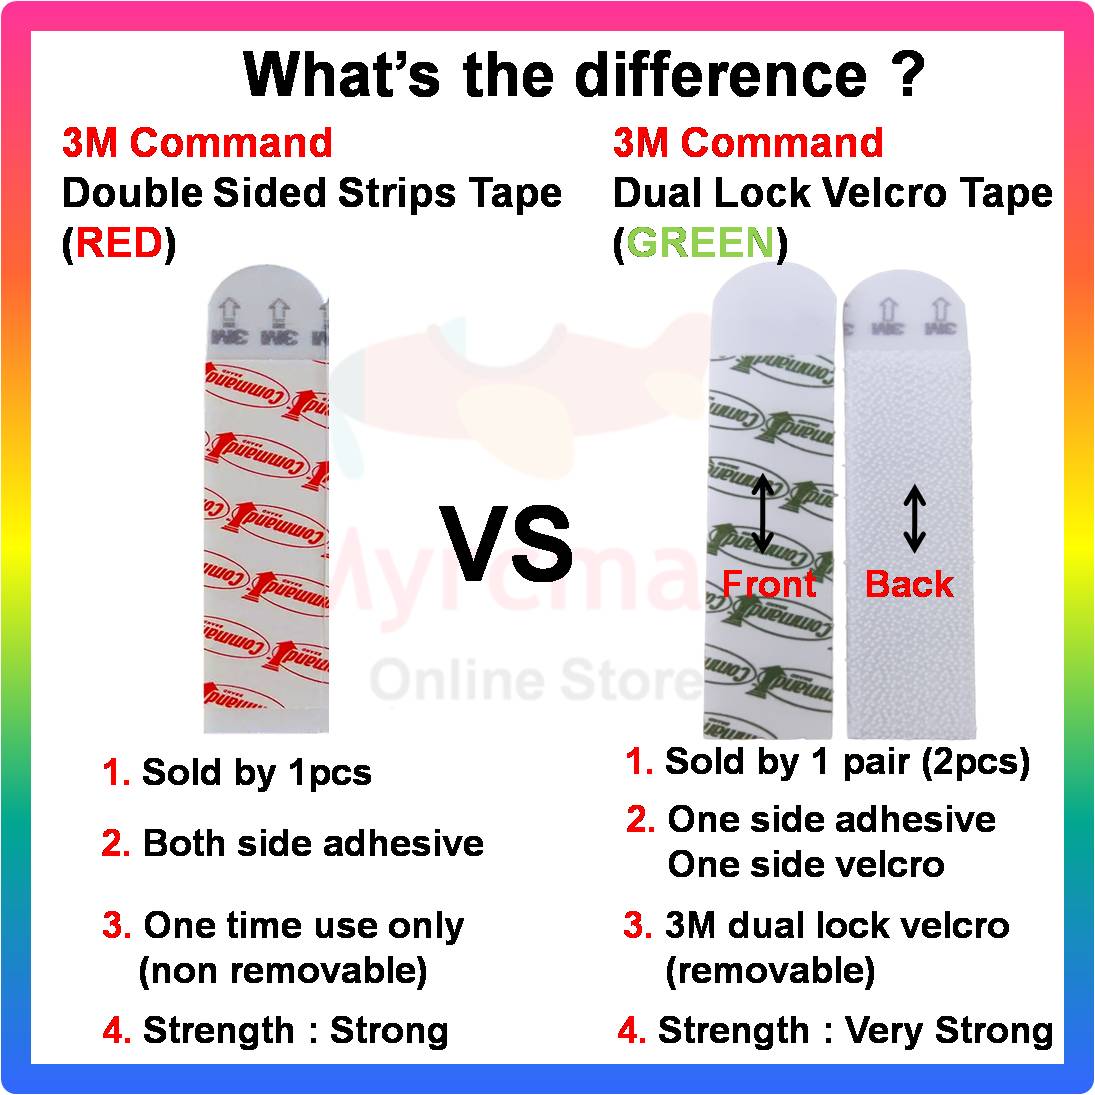 Command Strong Double Sided Wall Tape Strip Adhesive Refill for Home  Hanging